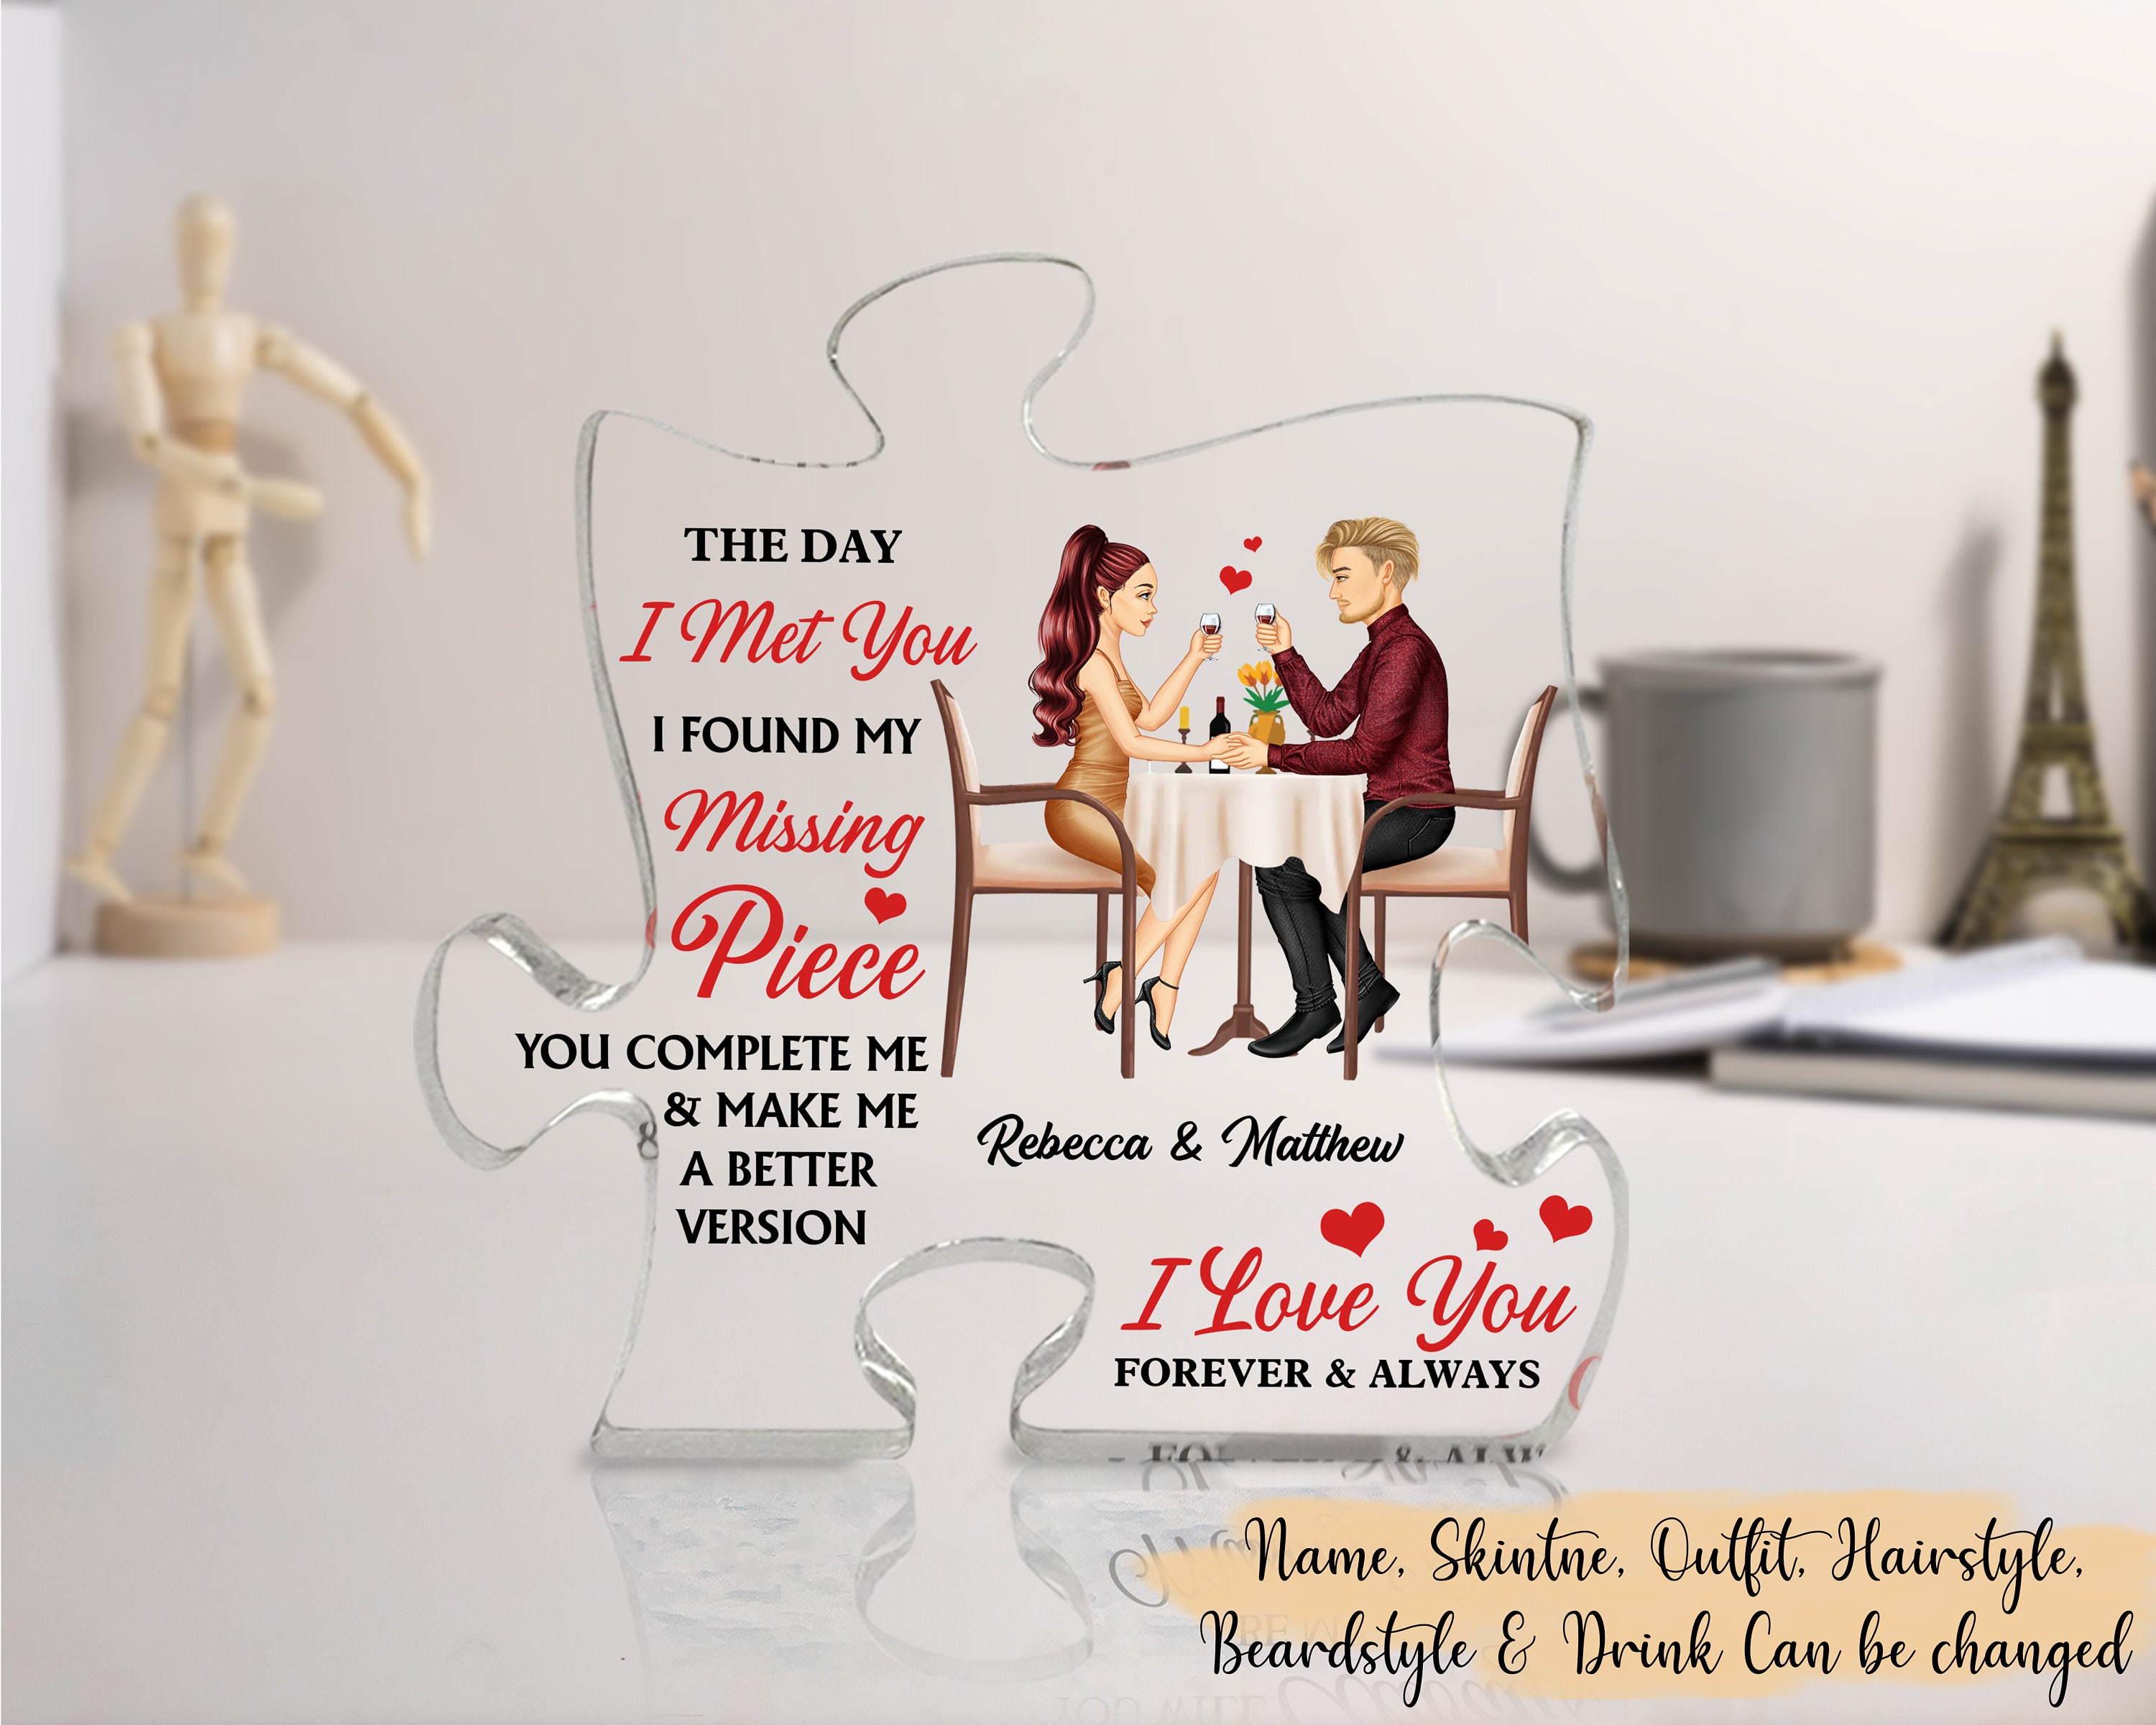 Personalized Map Our First Date Acrylic Plaque, Couple Custom Acrylic  Plaque, Anniversary Gift for Him, Valentine's Day Gift, Couple Gift 